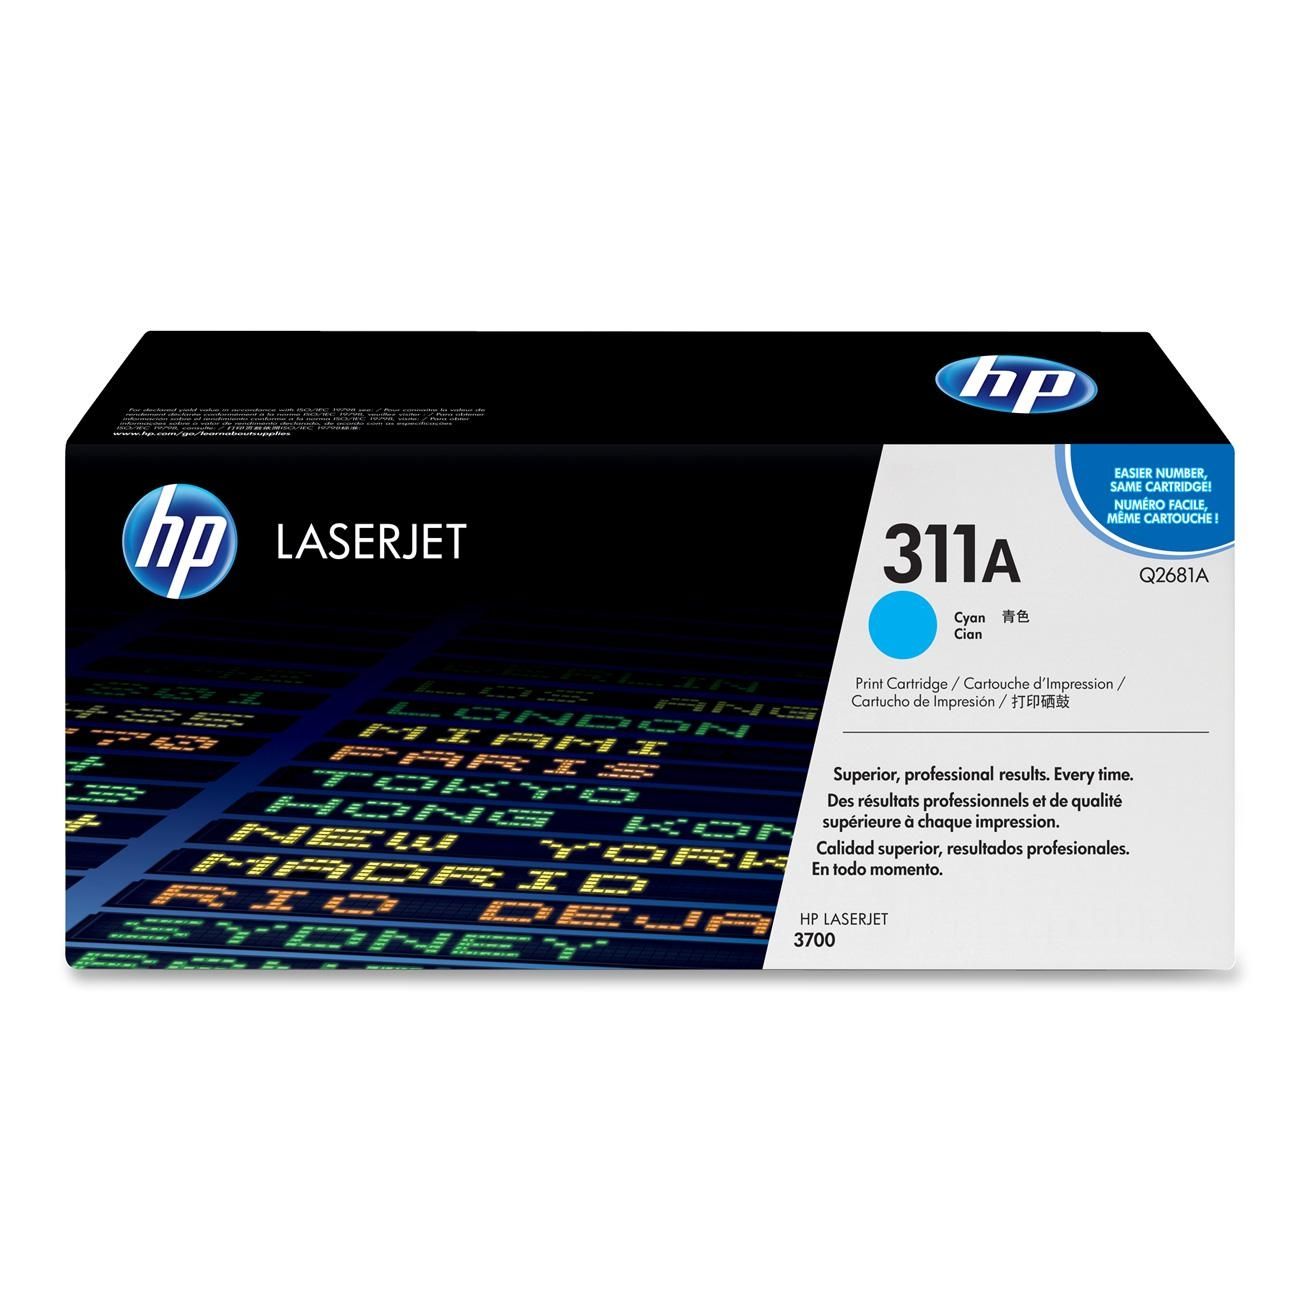 Related to HP 3700N: Q2681A